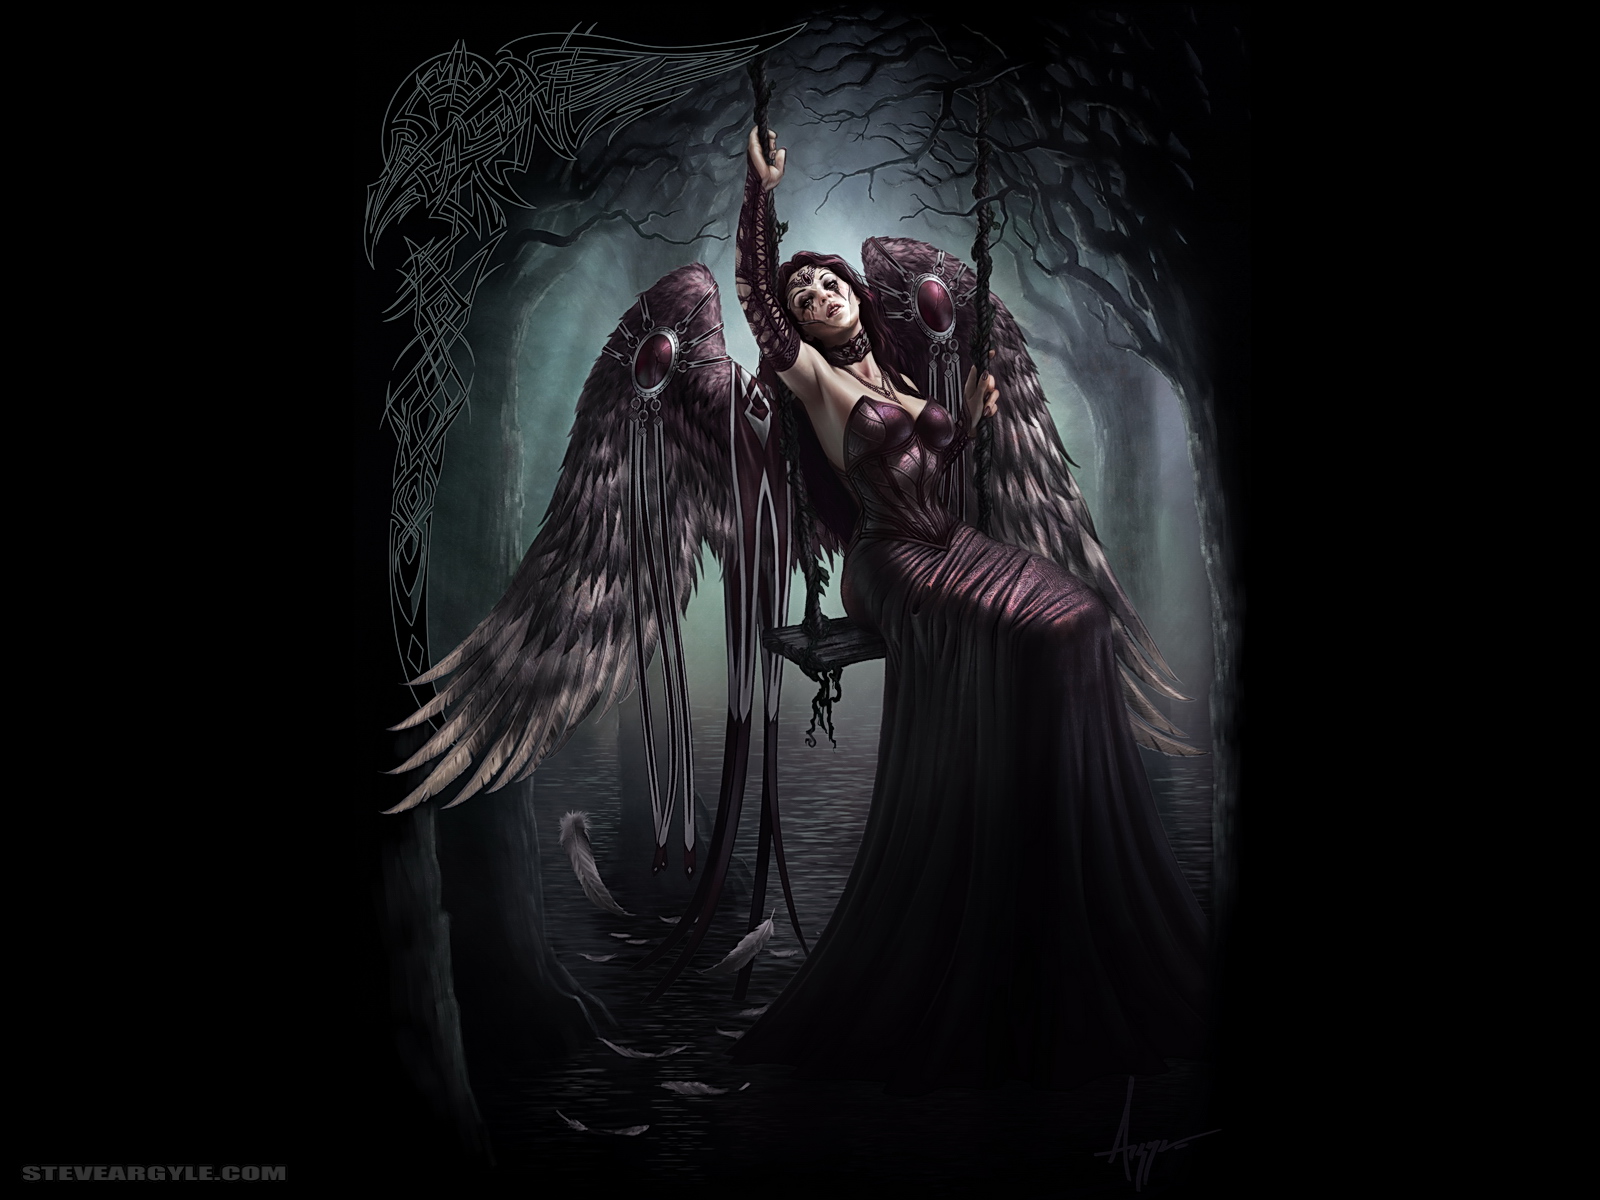 wings, Trees, Feathers, Gothic, Fantasy, Art, Swings, Steve, Argyle, Black, Background, Lace, Gloves, Gowns Wallpaper